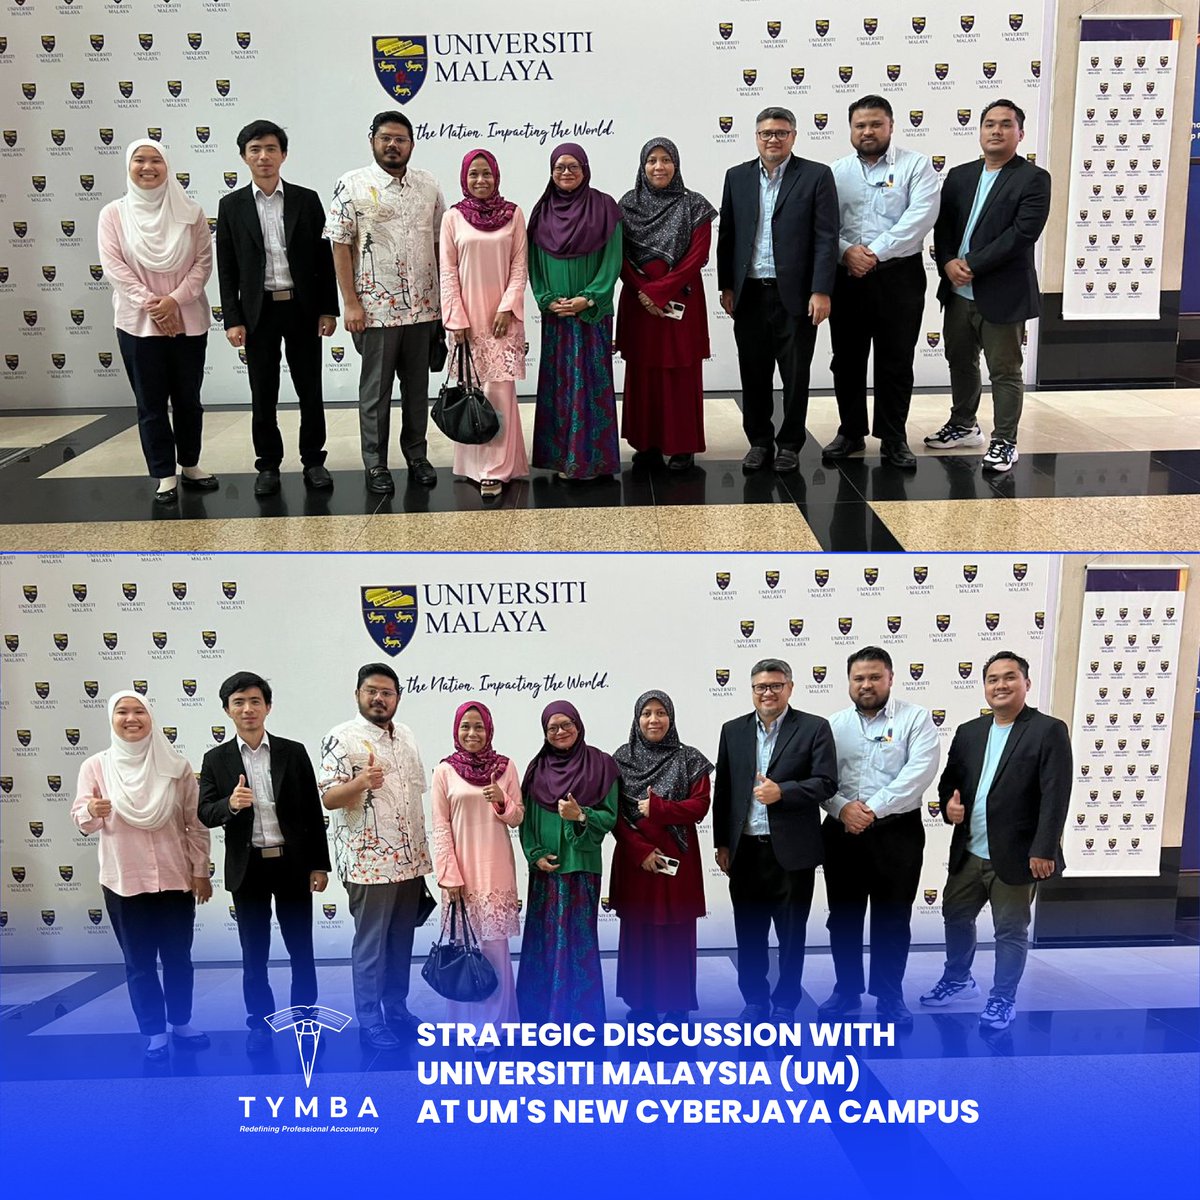 Strategic collaboration between TQP Education Group & University Malaya to nurture future leaders and igniting academic excellence together! 

#SoaringForward #RedefiningProfessionalAccountancy #CharteredAccountant #PushingTheLimits #BeyondLimits #ProfessionalAccountancy